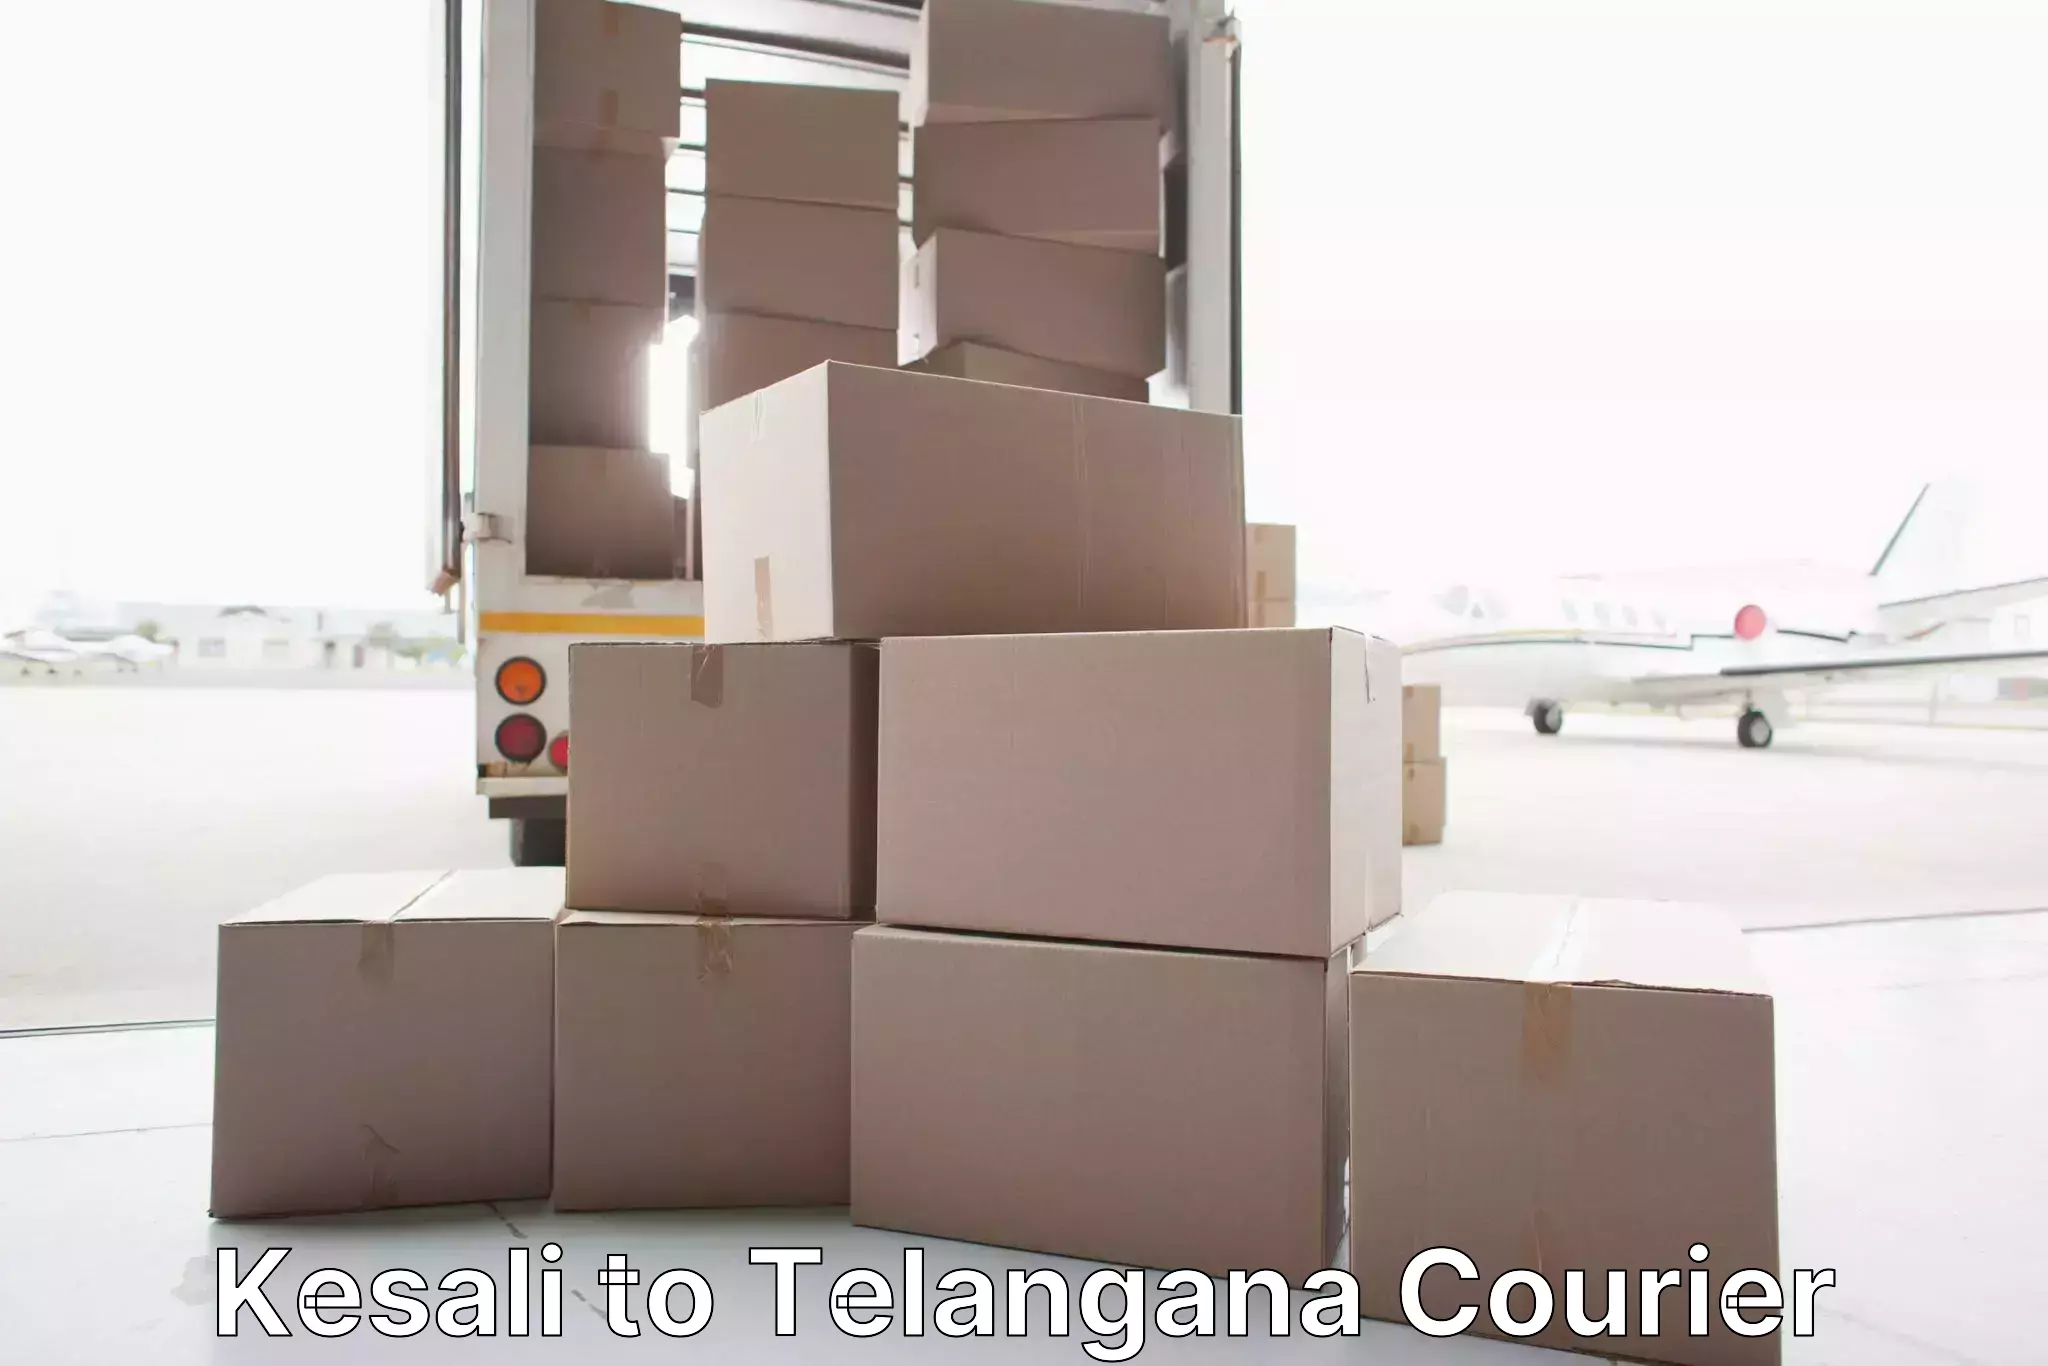 Quality relocation services Kesali to Gangadhara